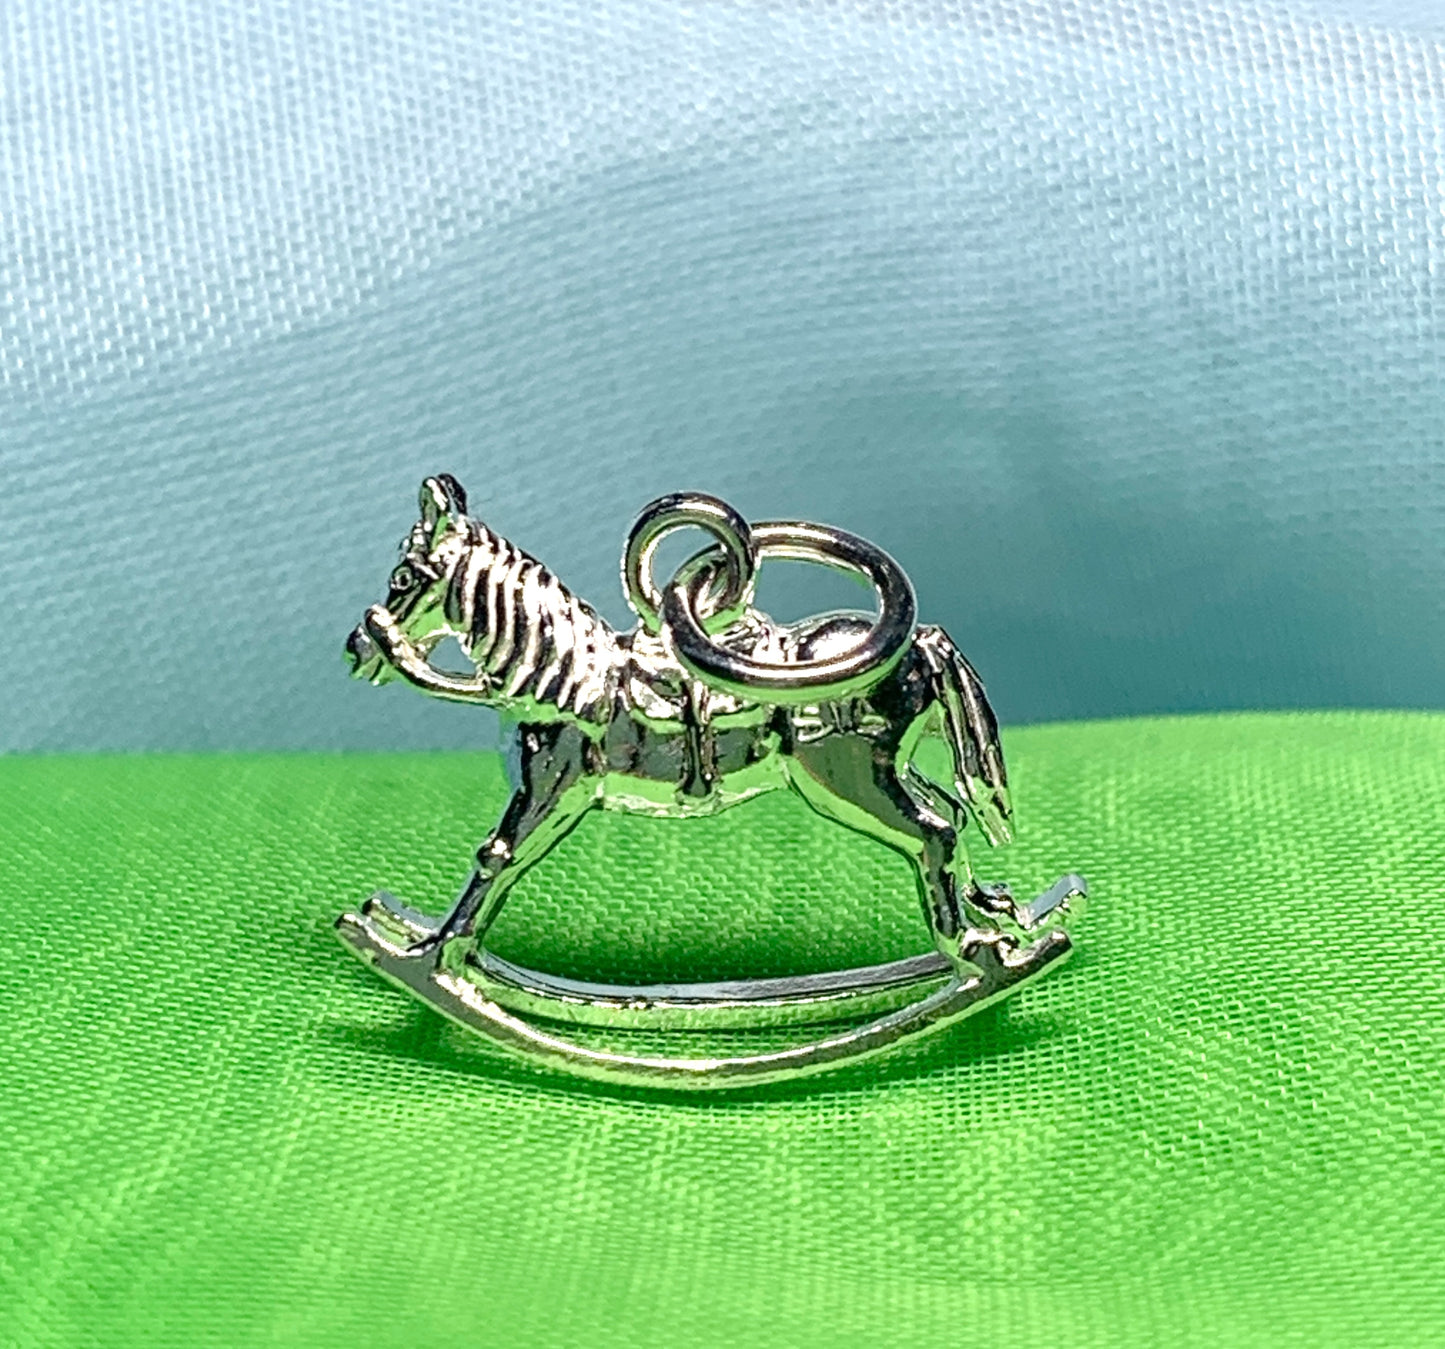 Rocking horse sterling silver charm